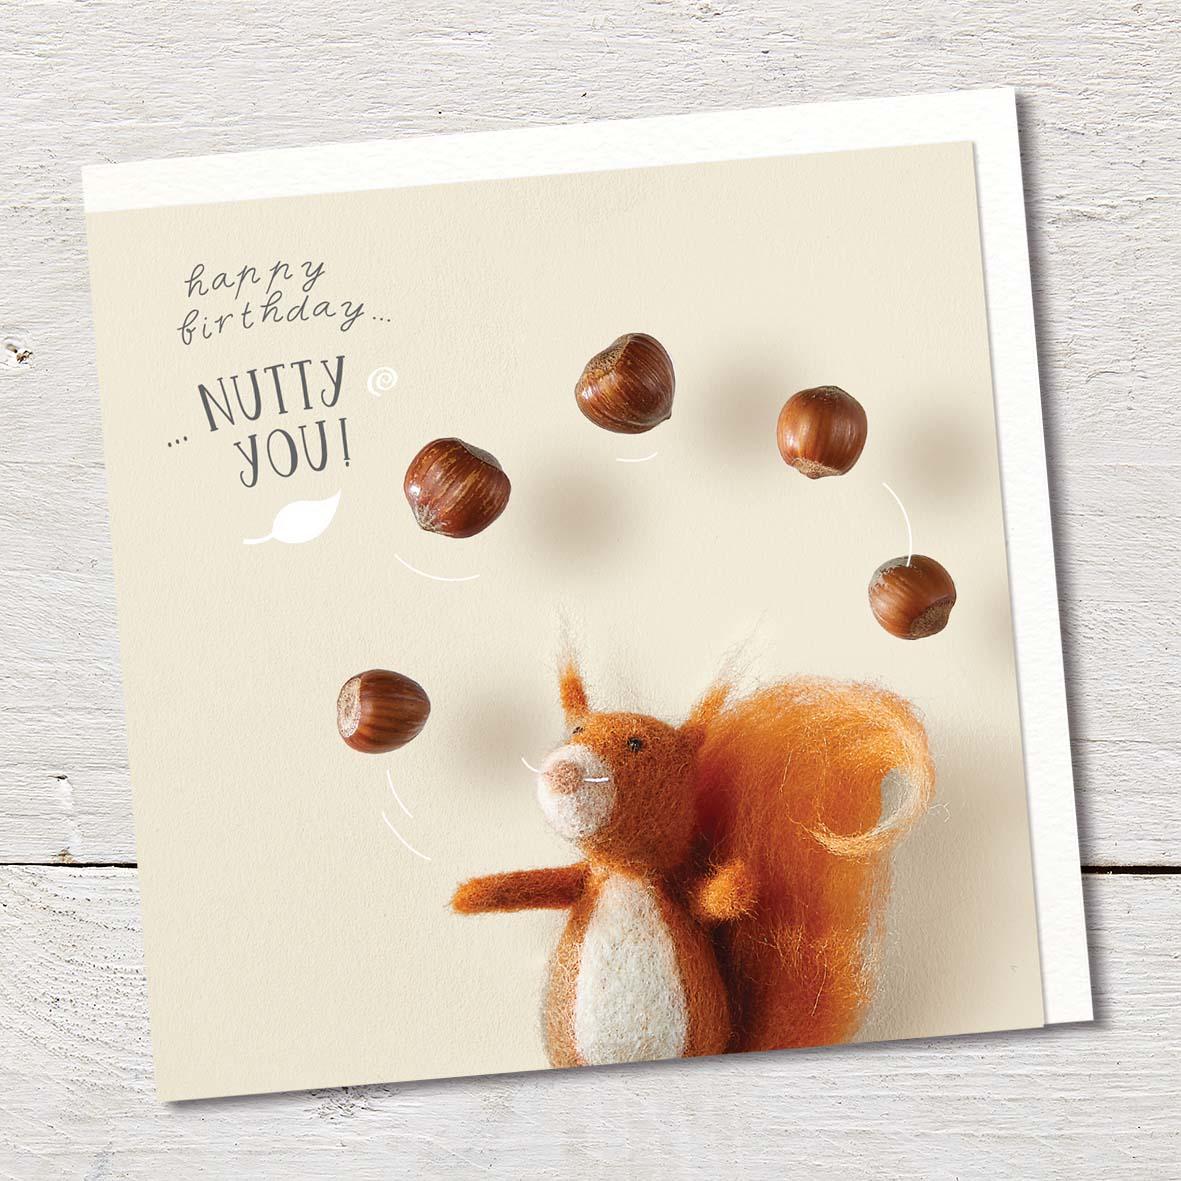 Card featuring a cute felted red squirrel juggling hazelnuts.